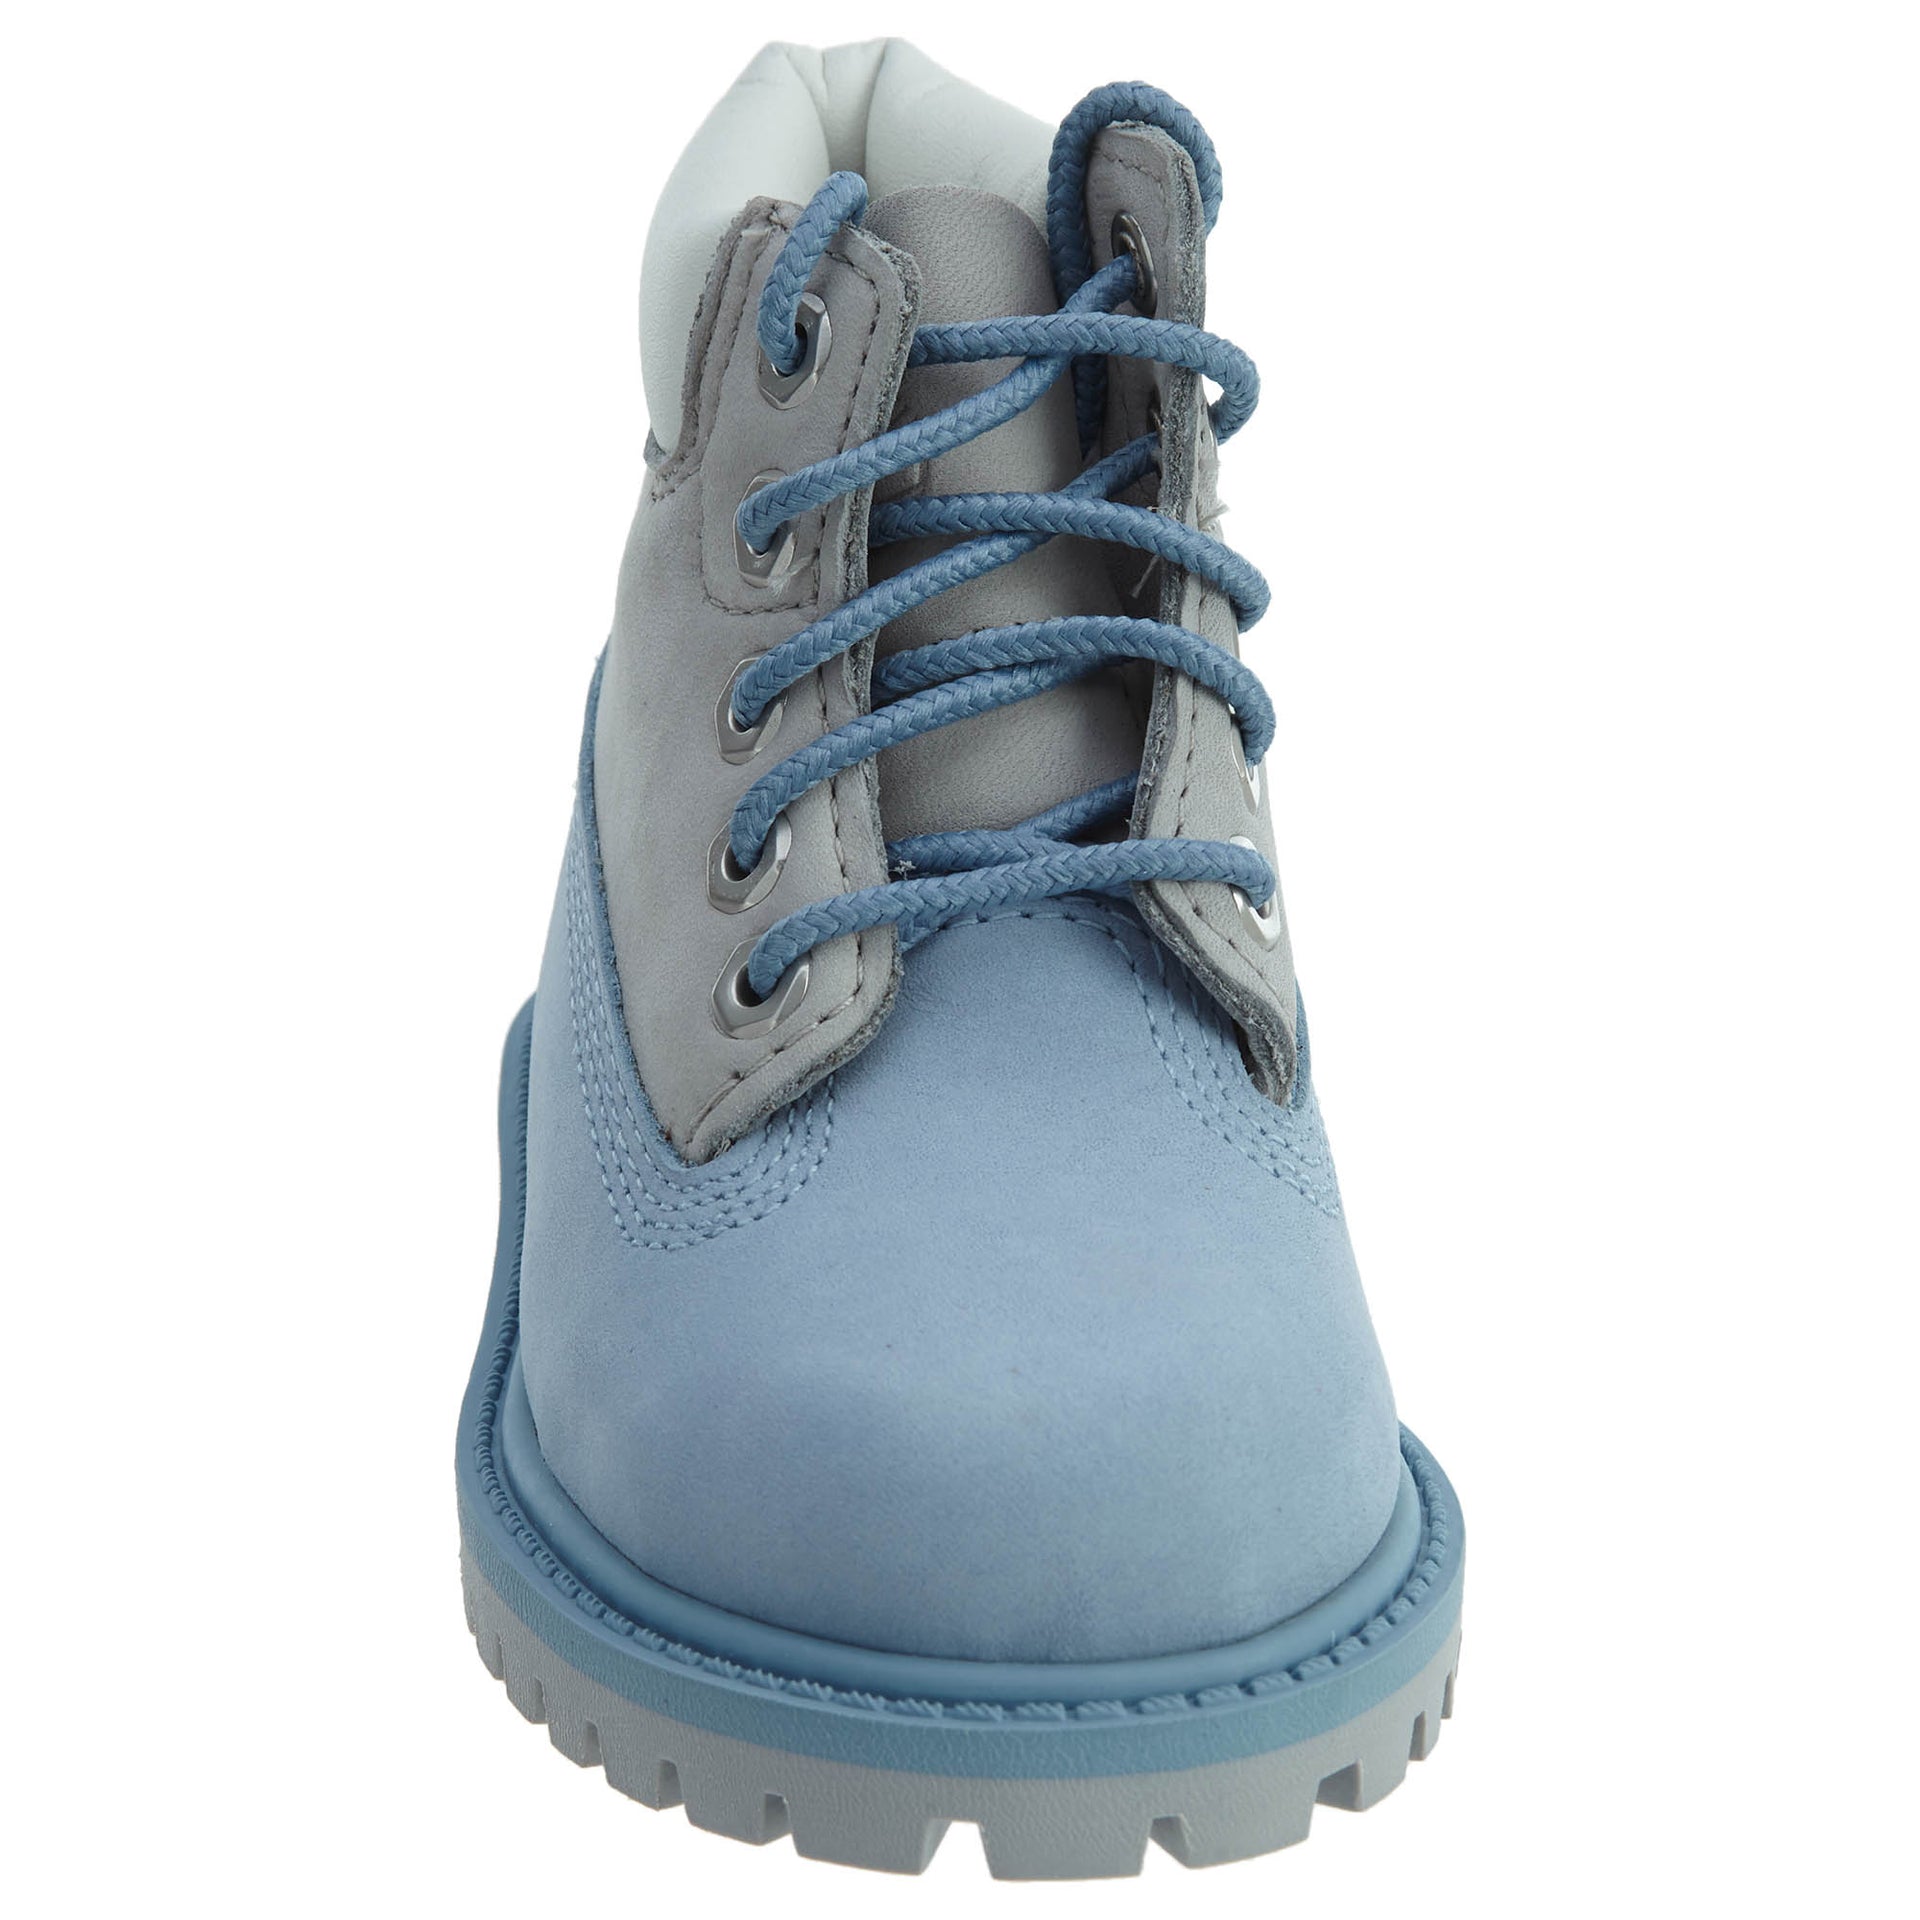 Timberland 6" Premium Boot Toddlers Style : Tb0a14va